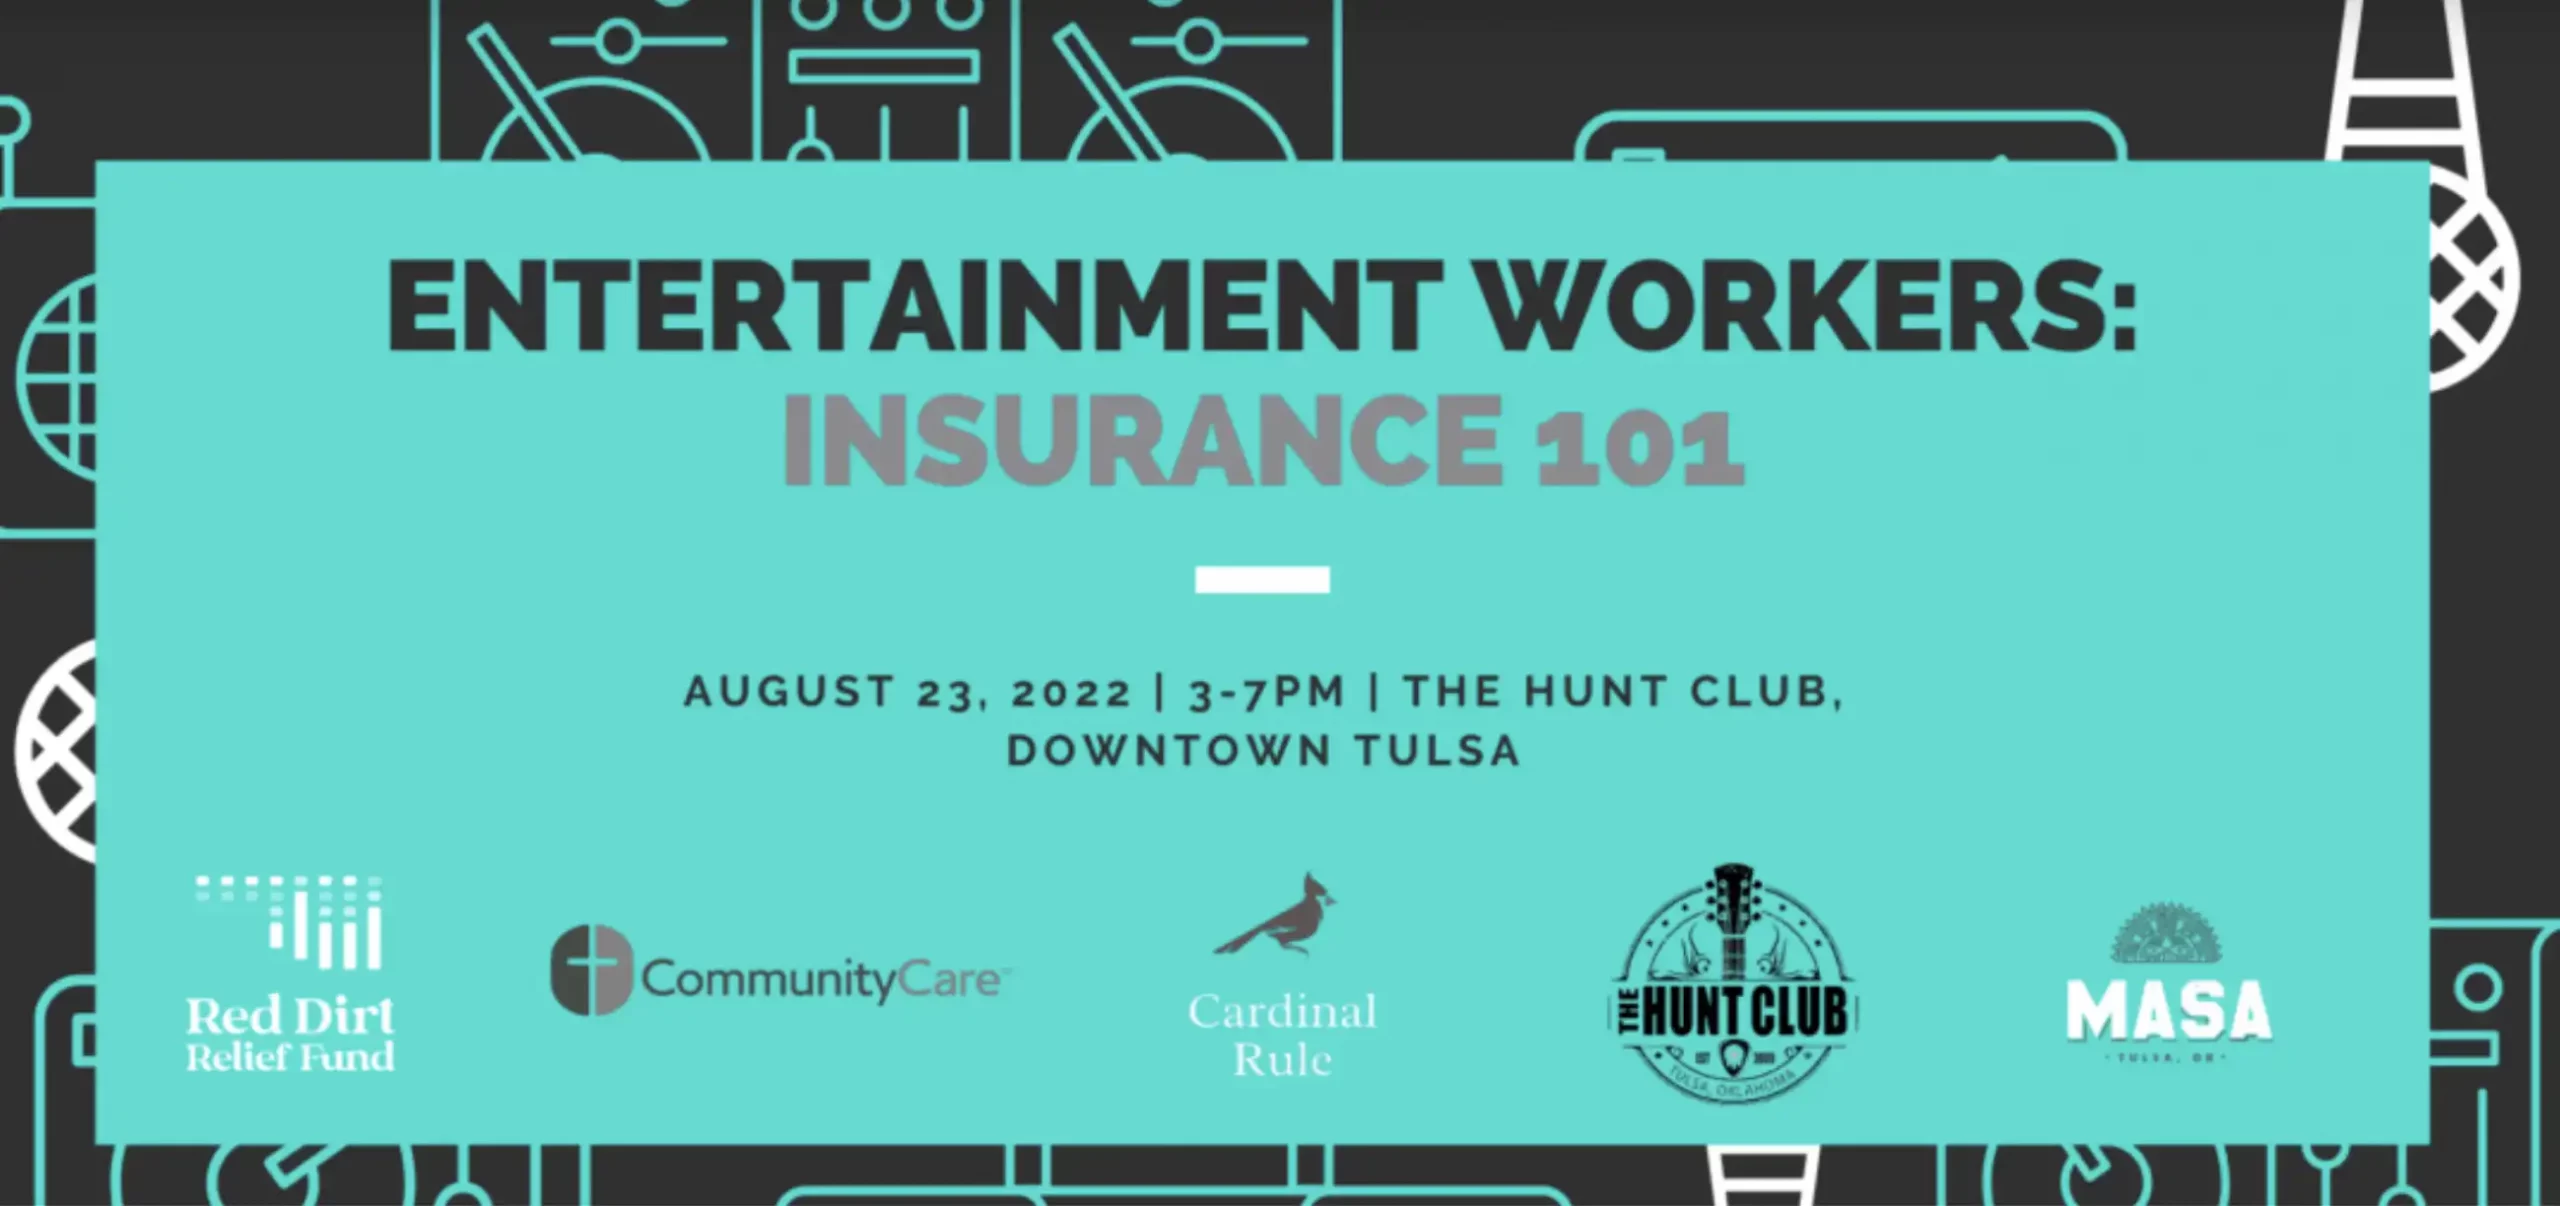 Entertainment workers insurance resources from the red dirt relief fund in oklahoma